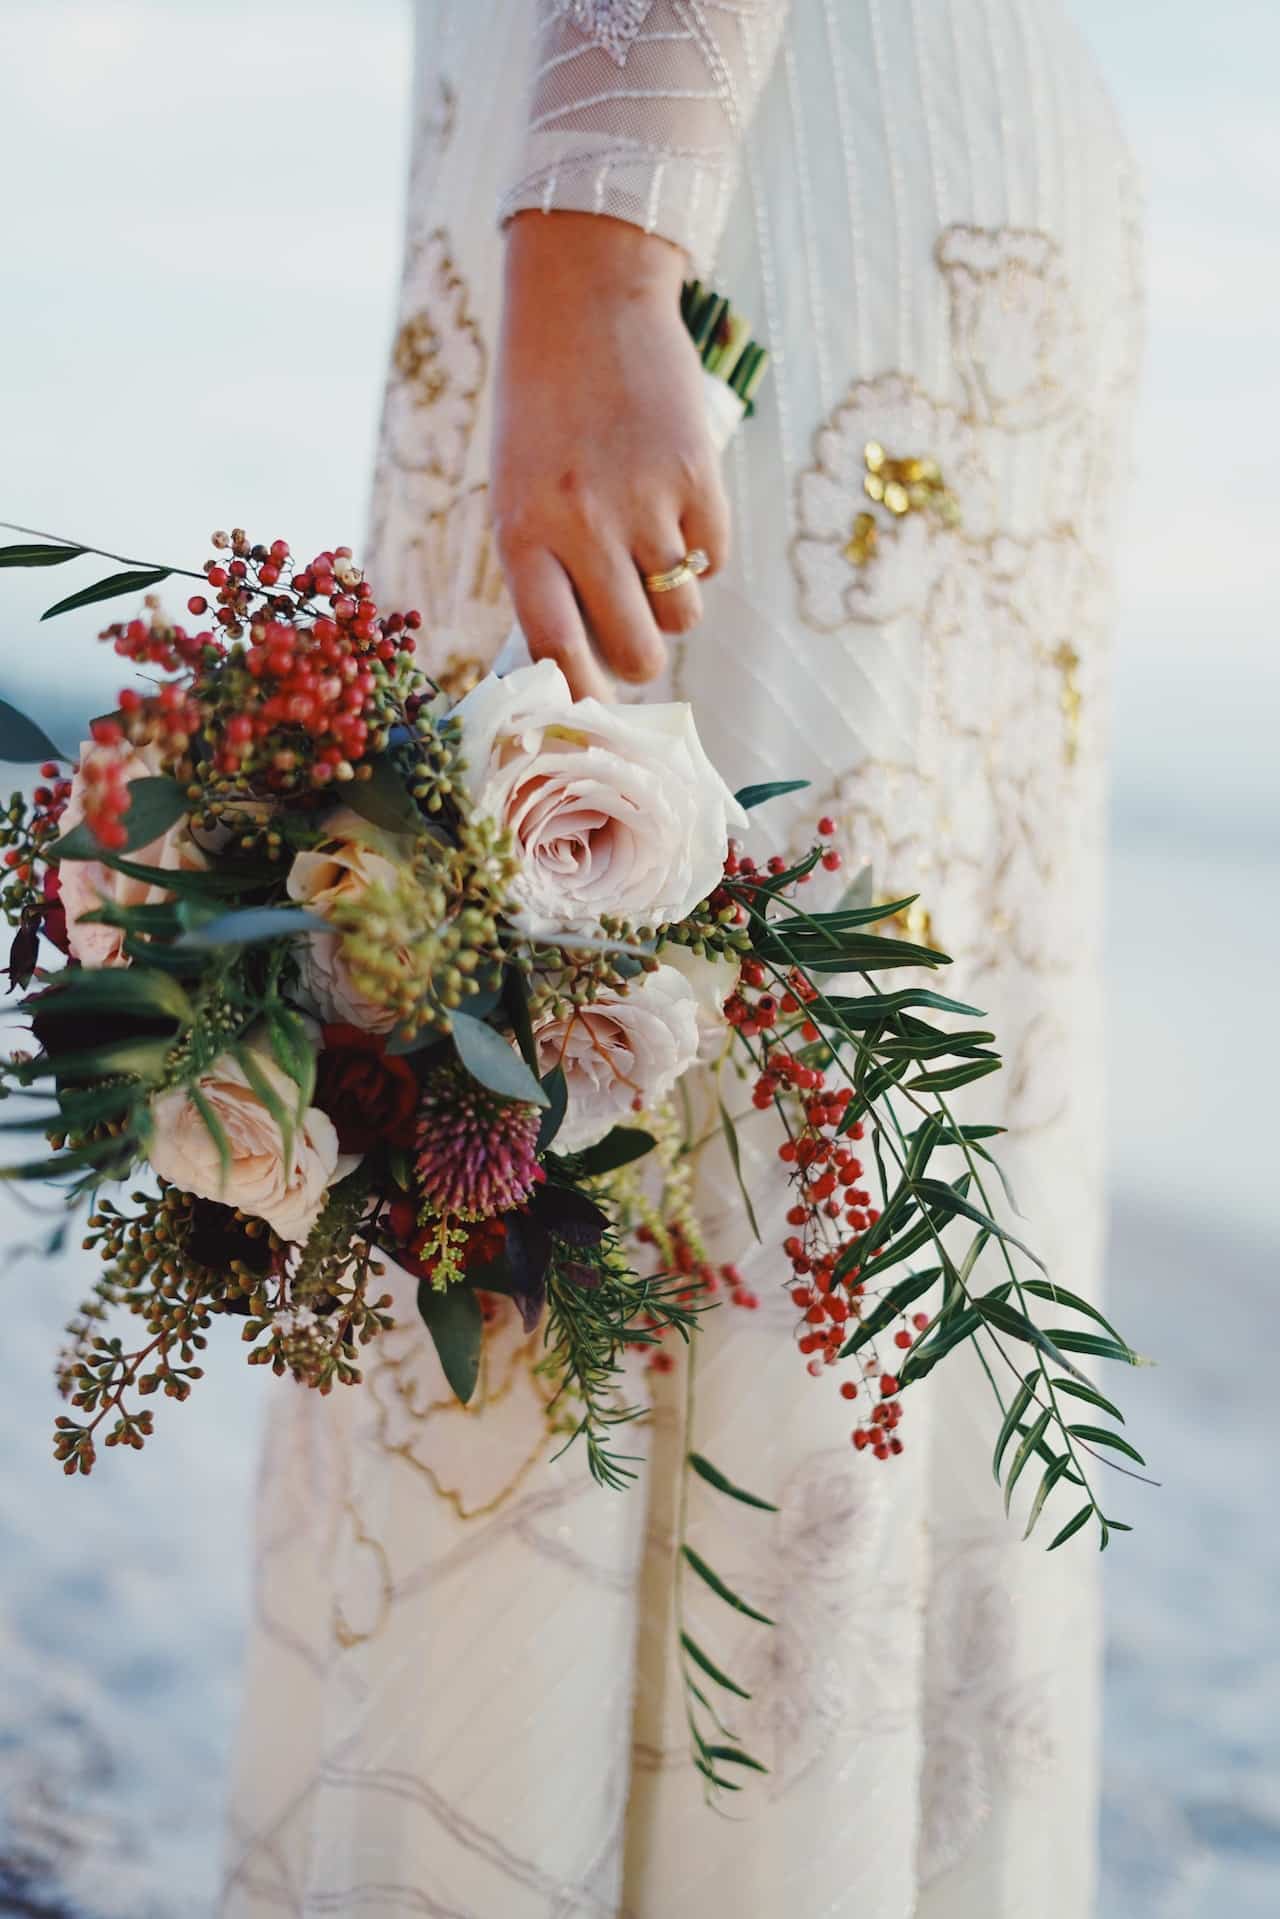 Close up photo of a person in a bridal gown holding a bouquet of flowers, visible only from hip down.